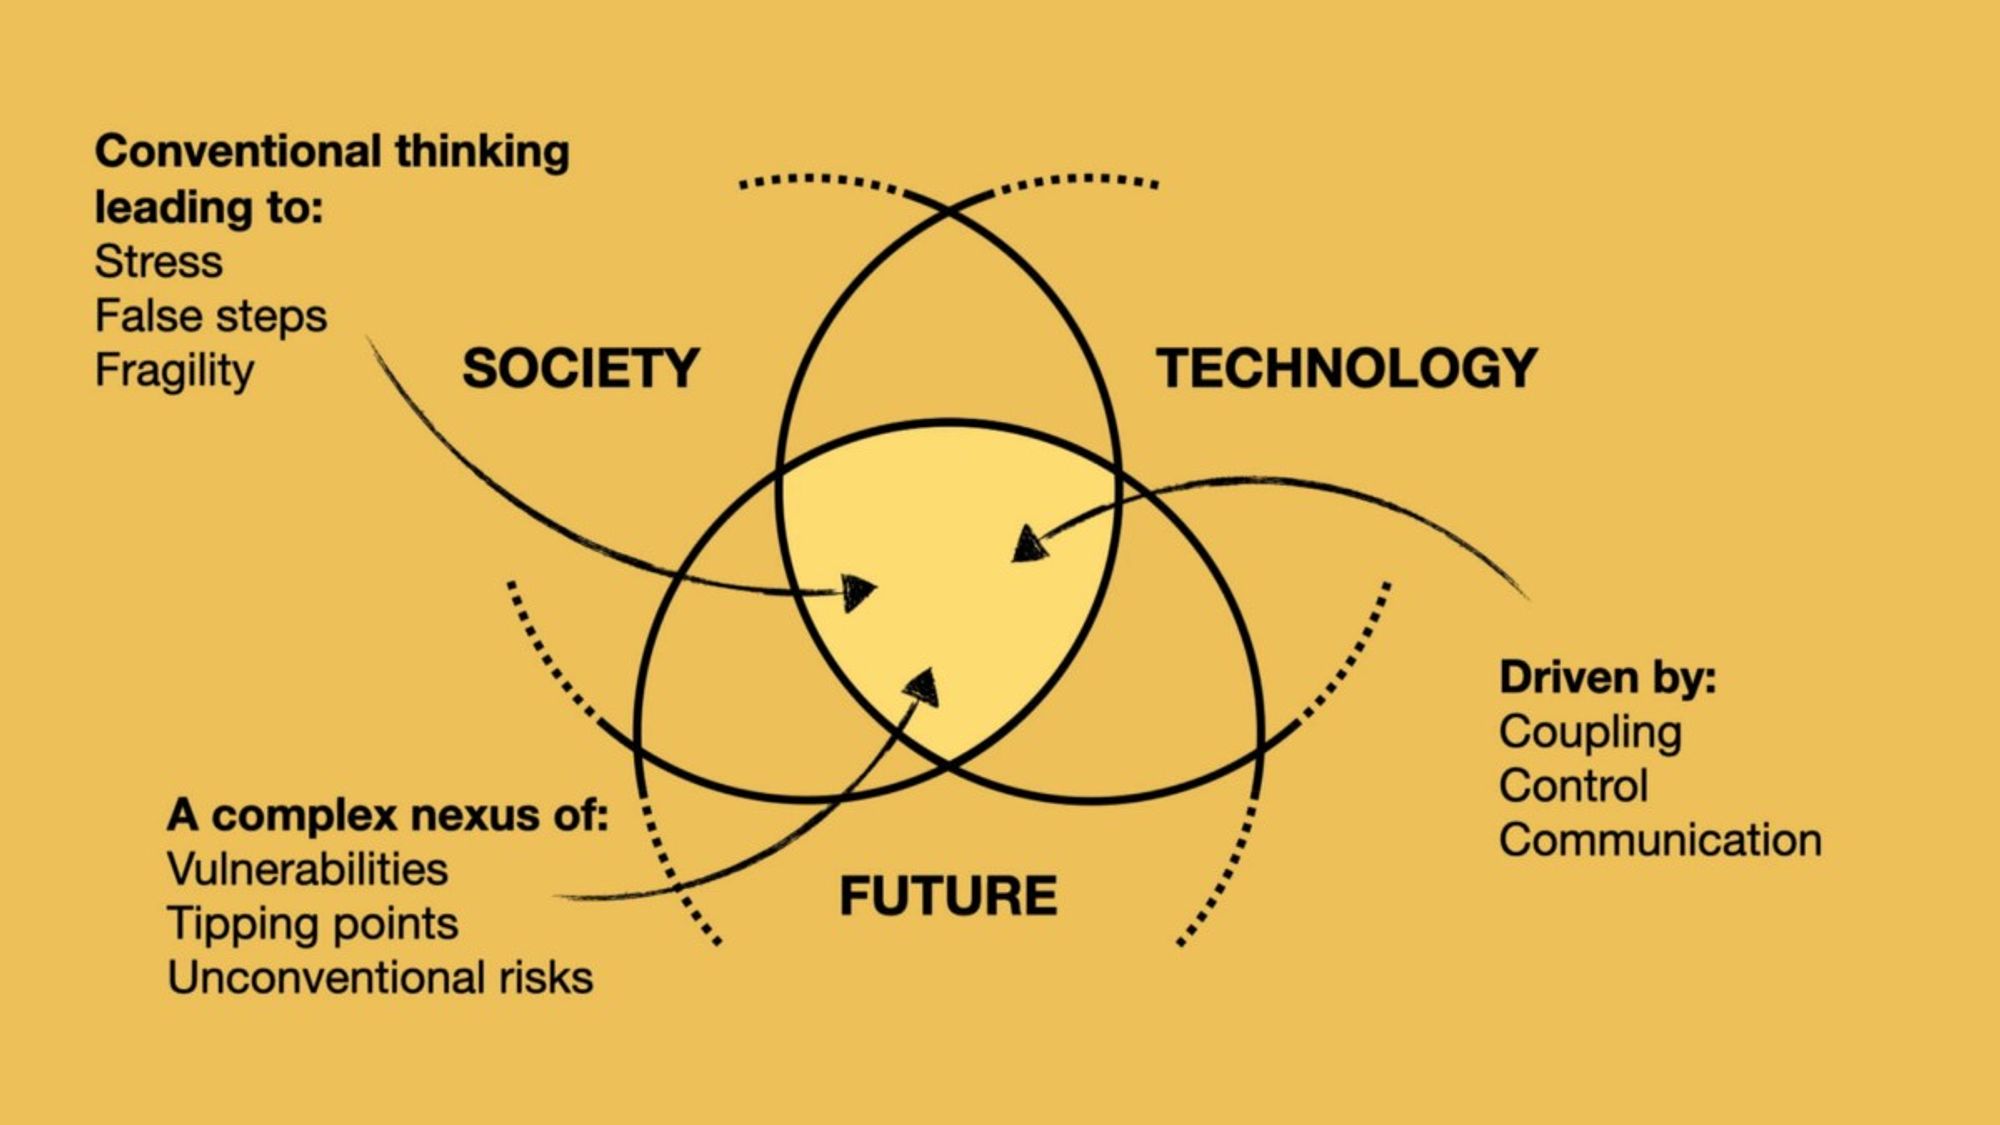 An Introduction to Thinking Differently about Technology, Society & The Future | by Andrew Maynard | EDGE OF INNOVATION | Medium